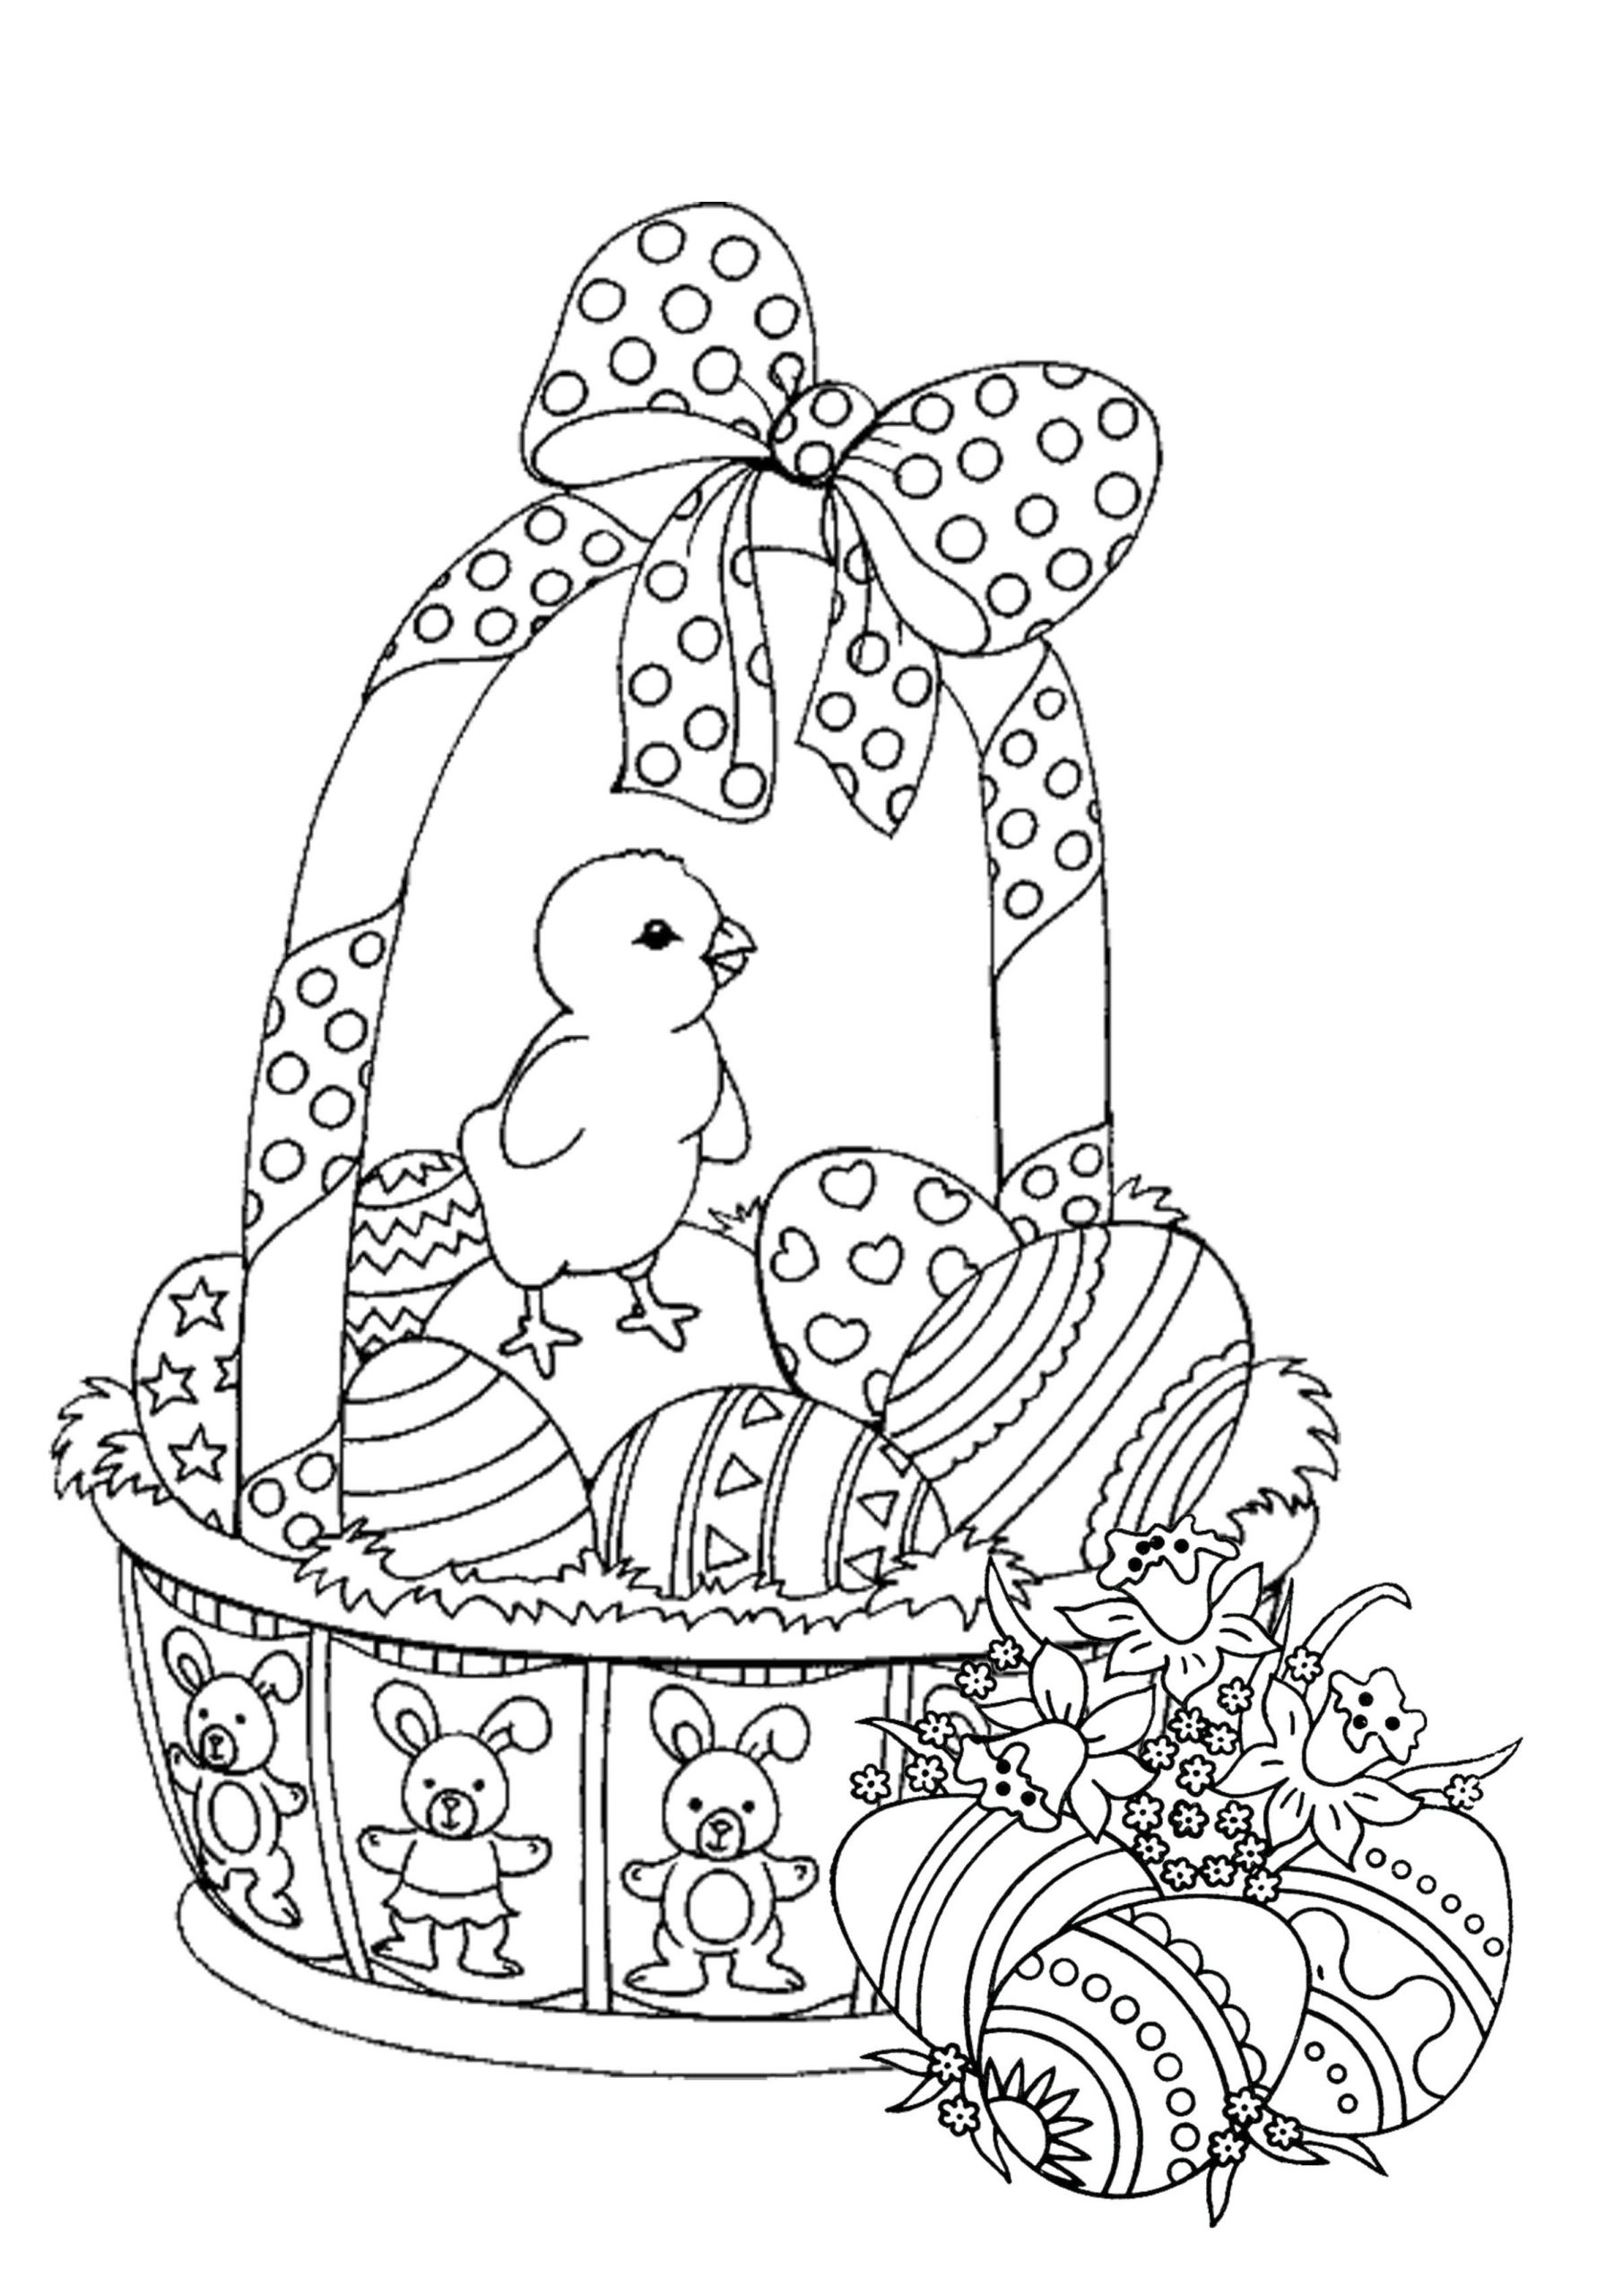 Get This Adult Easter Coloring Pages Easter Basket with Little Chick 